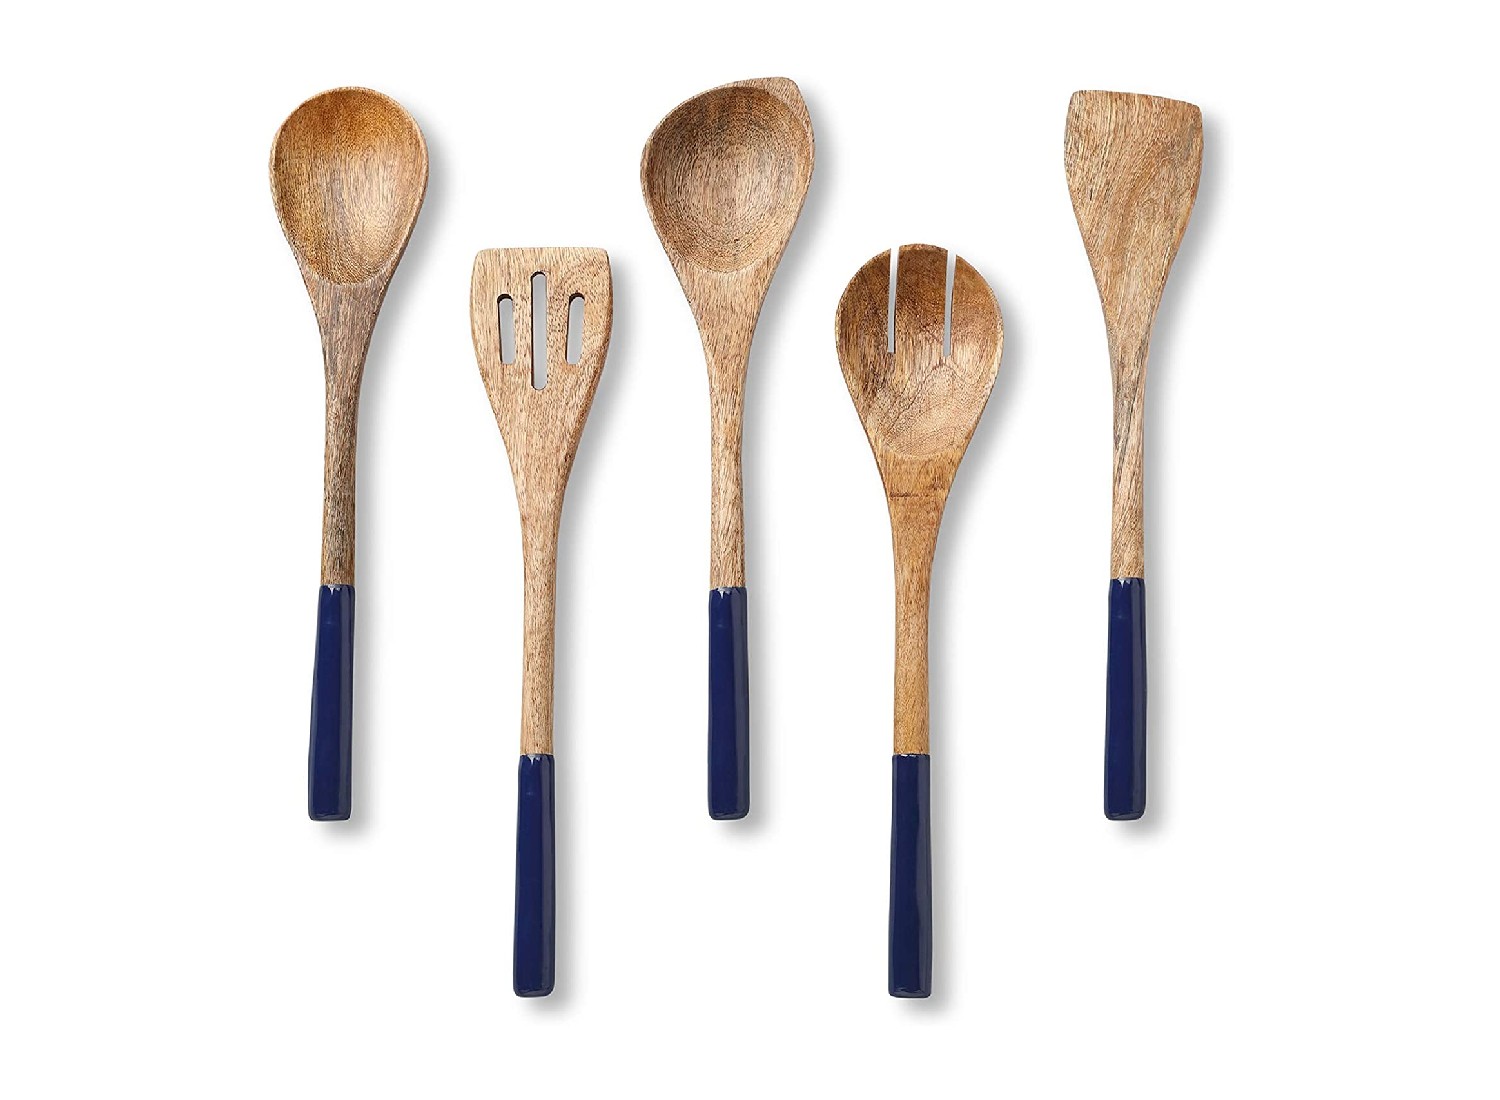 https://www.cuisineathome.com/review/wp-content/uploads/2022/11/spoons.jpg